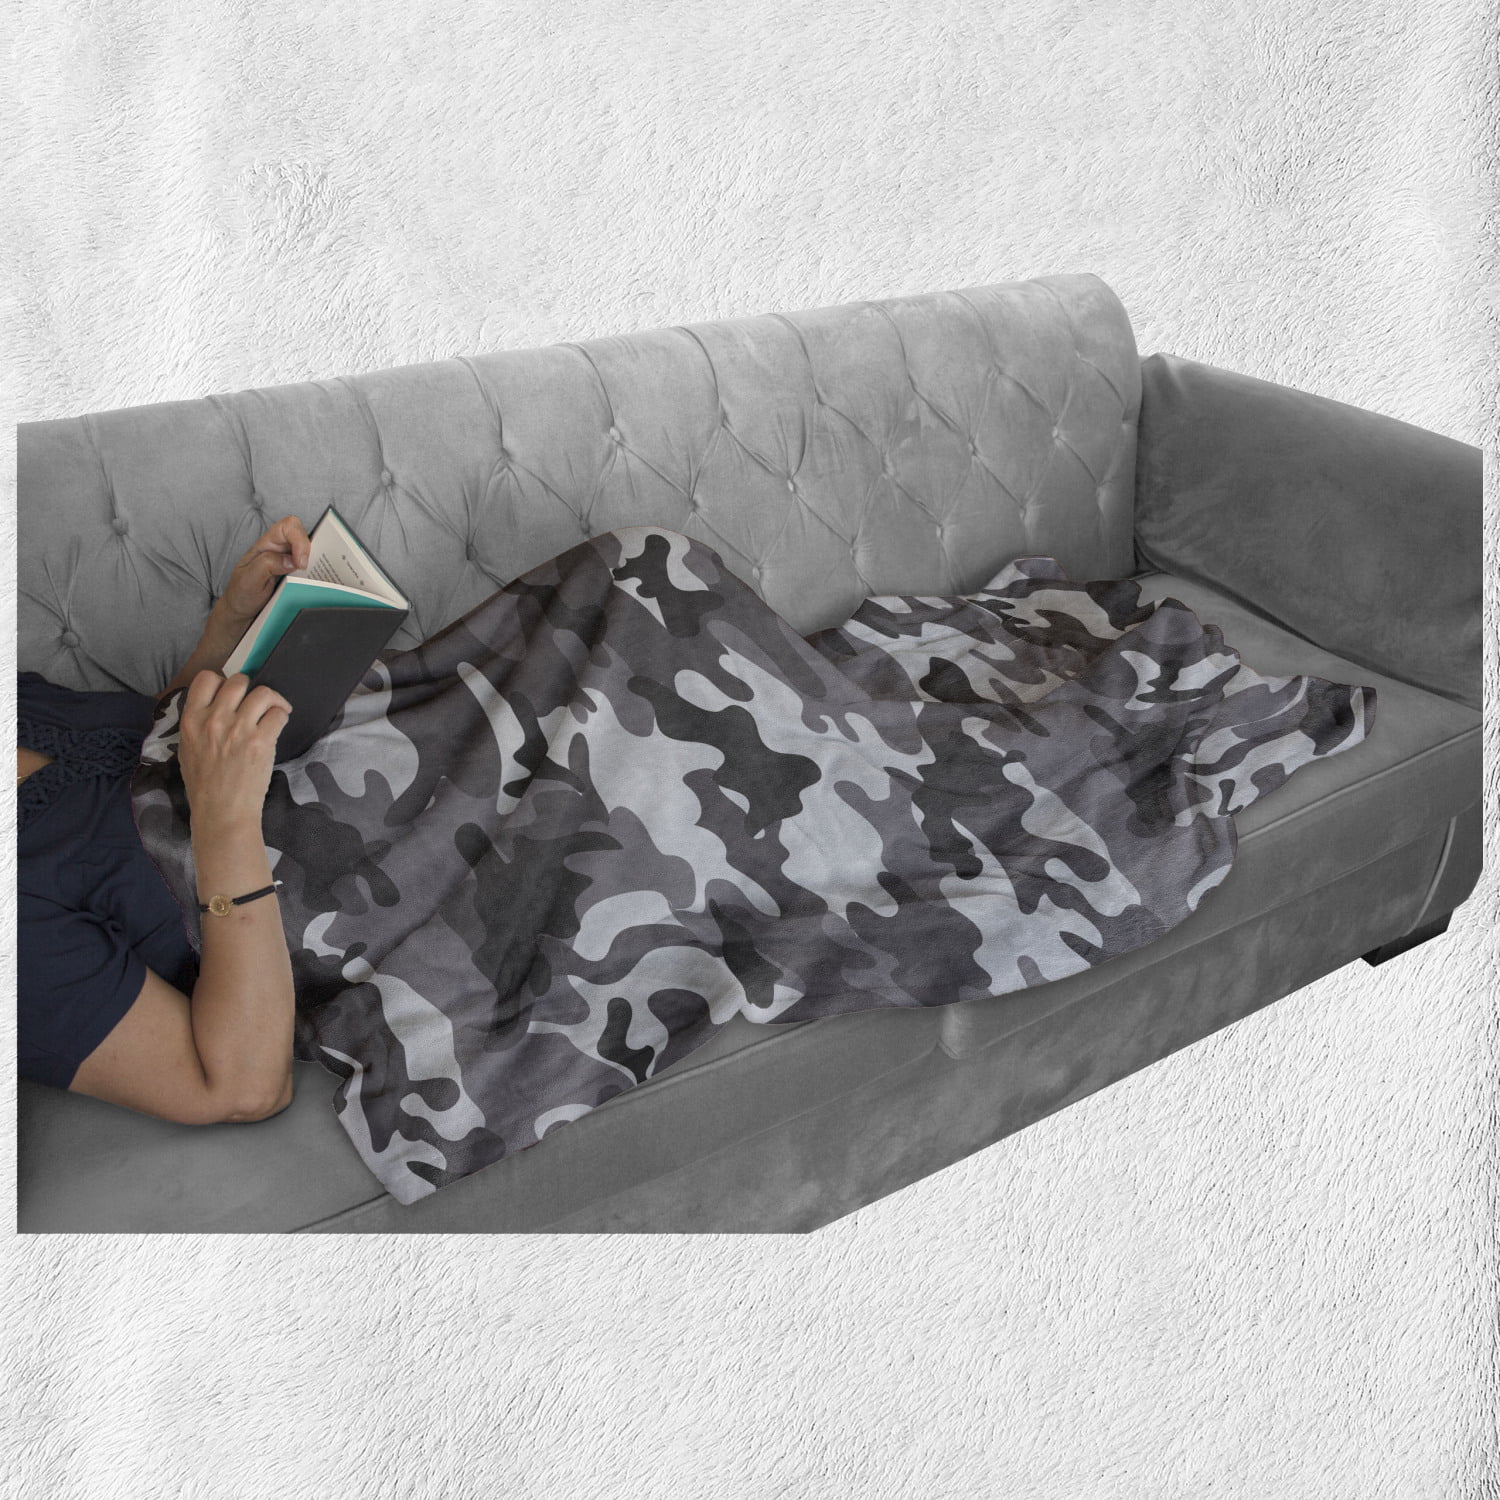 60 x 80 Monochrome Attire Pattern Camouflage Inside Vegetation Fashion Design Print Grey Coconut Cozy Plush for Indoor and Outdoor Use Ambesonne Camouflage Soft Flannel Fleece Throw Blanket 